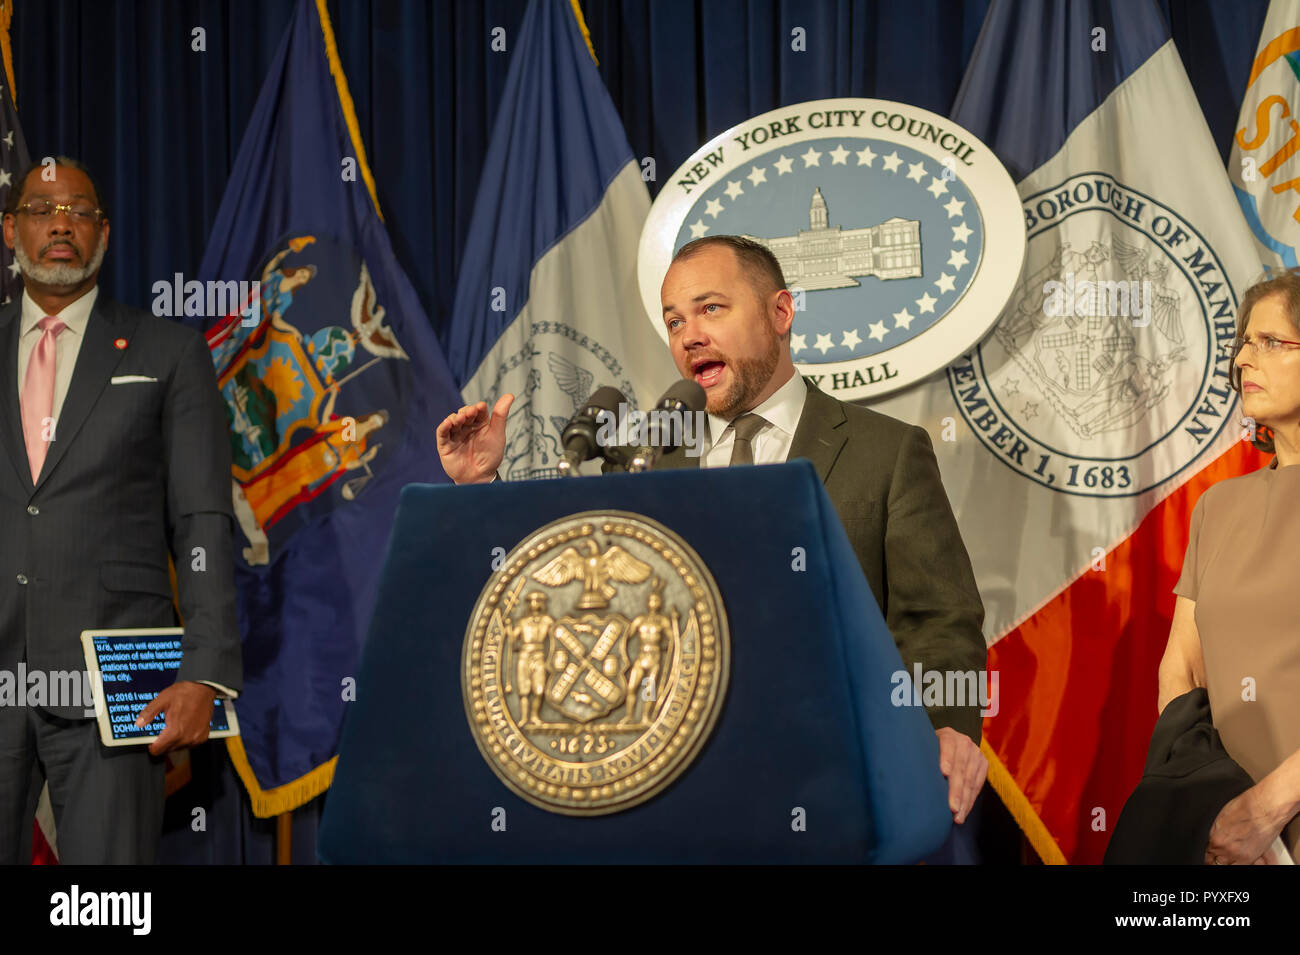 New York City Council Speaker Corey Johnson and members of the New York City Council hold a news conference  on Wednesday, October 17, 2018 in the Red Room of New York City Hall about pending legislation including the Parental Empowerment Package. (Â© Frances M. Roberts) Stock Photo